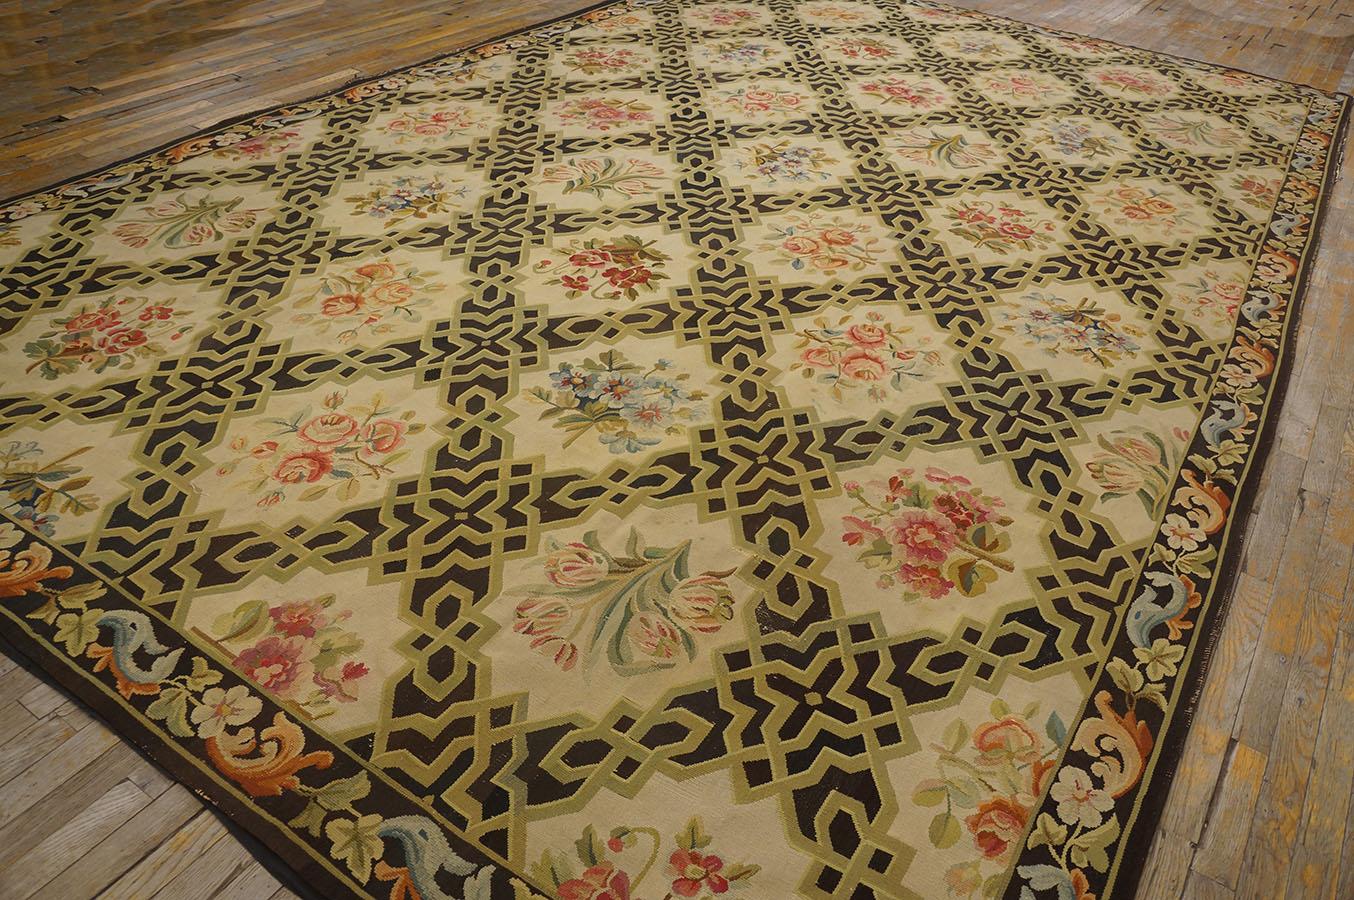 Early 20th Century French Aubusson Carpet ( 9' 8'' x 15' 3'' - 295 x 465 cm ) For Sale 5